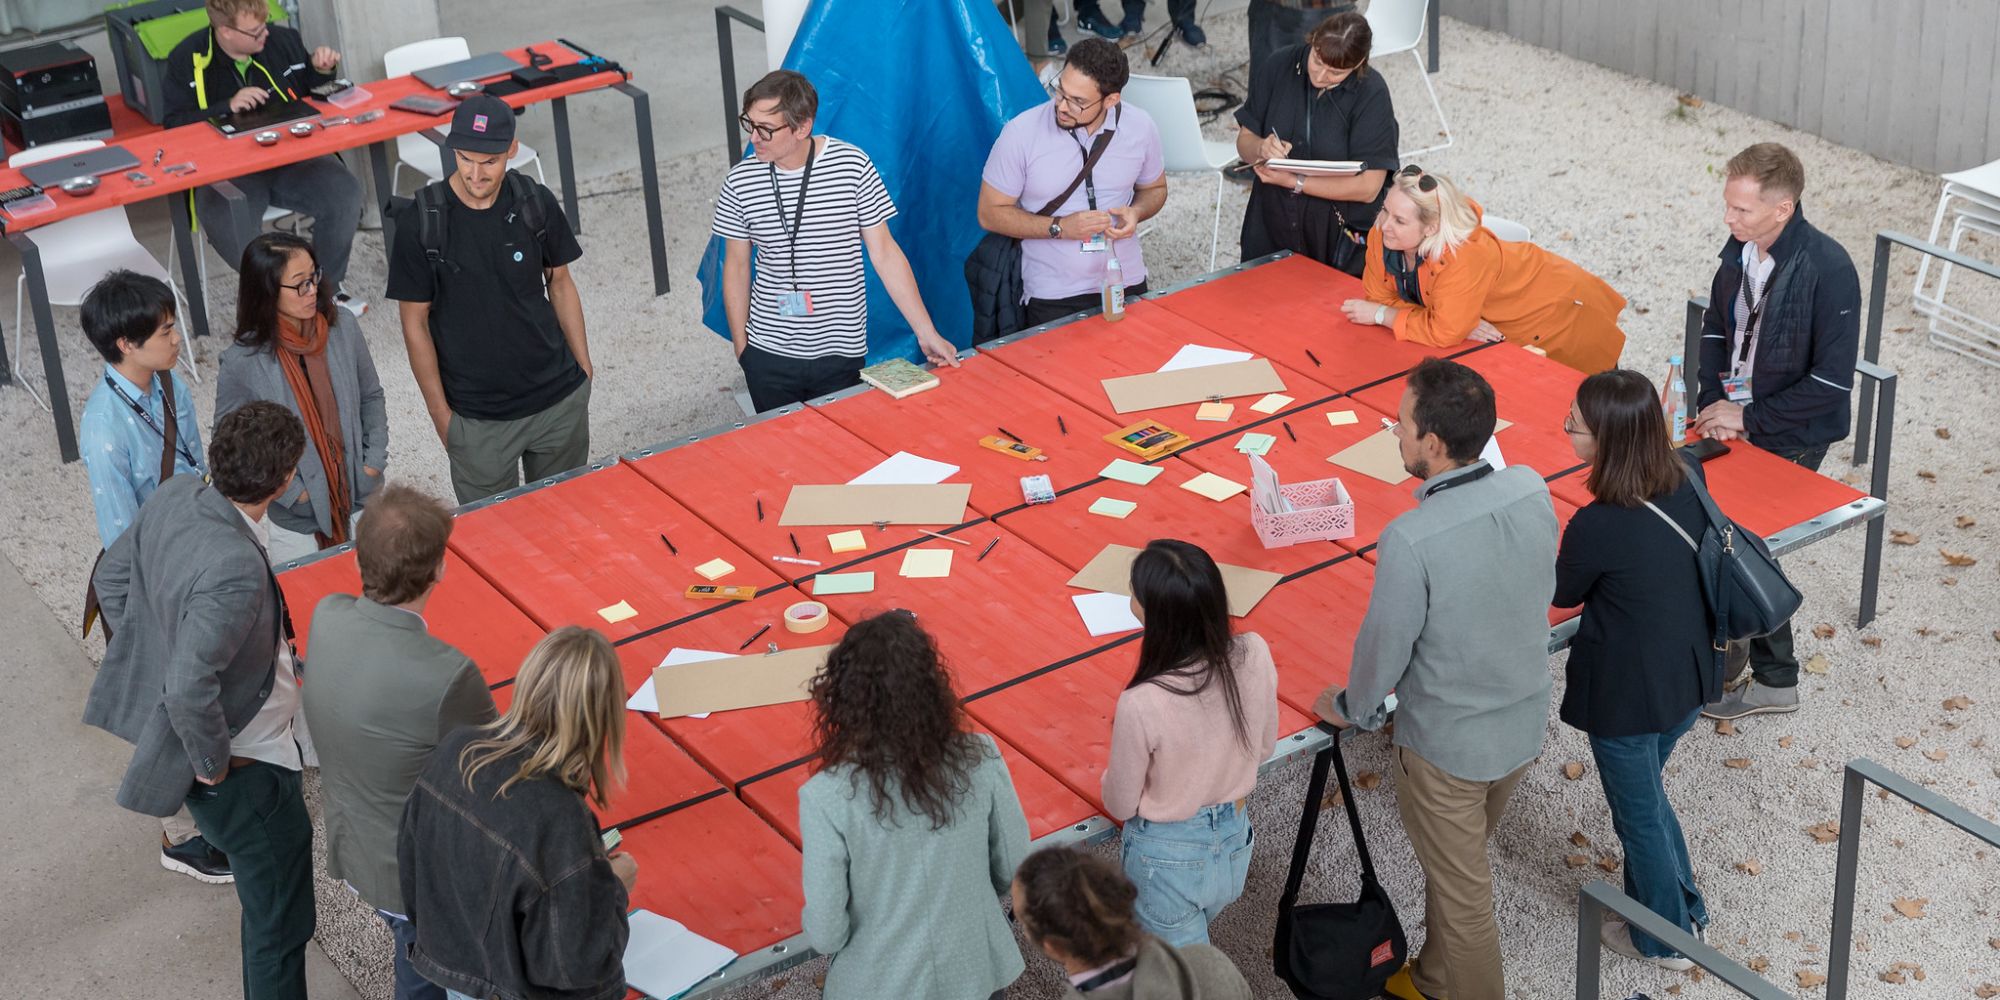 Workshop setting at the Ars Electronica Festival